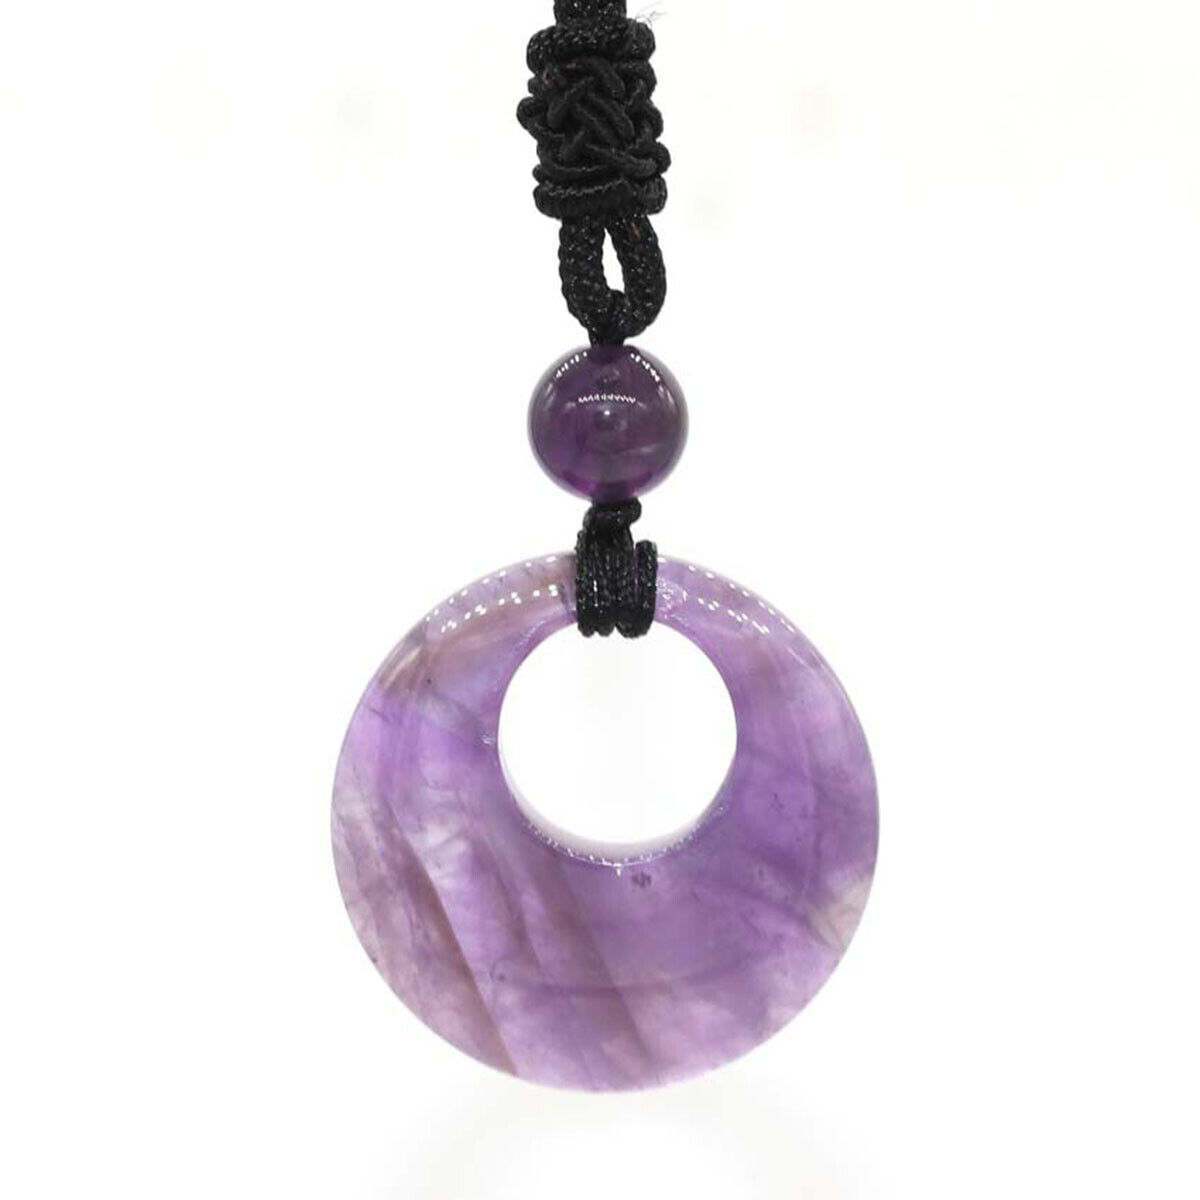 Natural Reiki Healing Crystal Stone Necklace Lucky Coin Pendant Amulet Jewelry